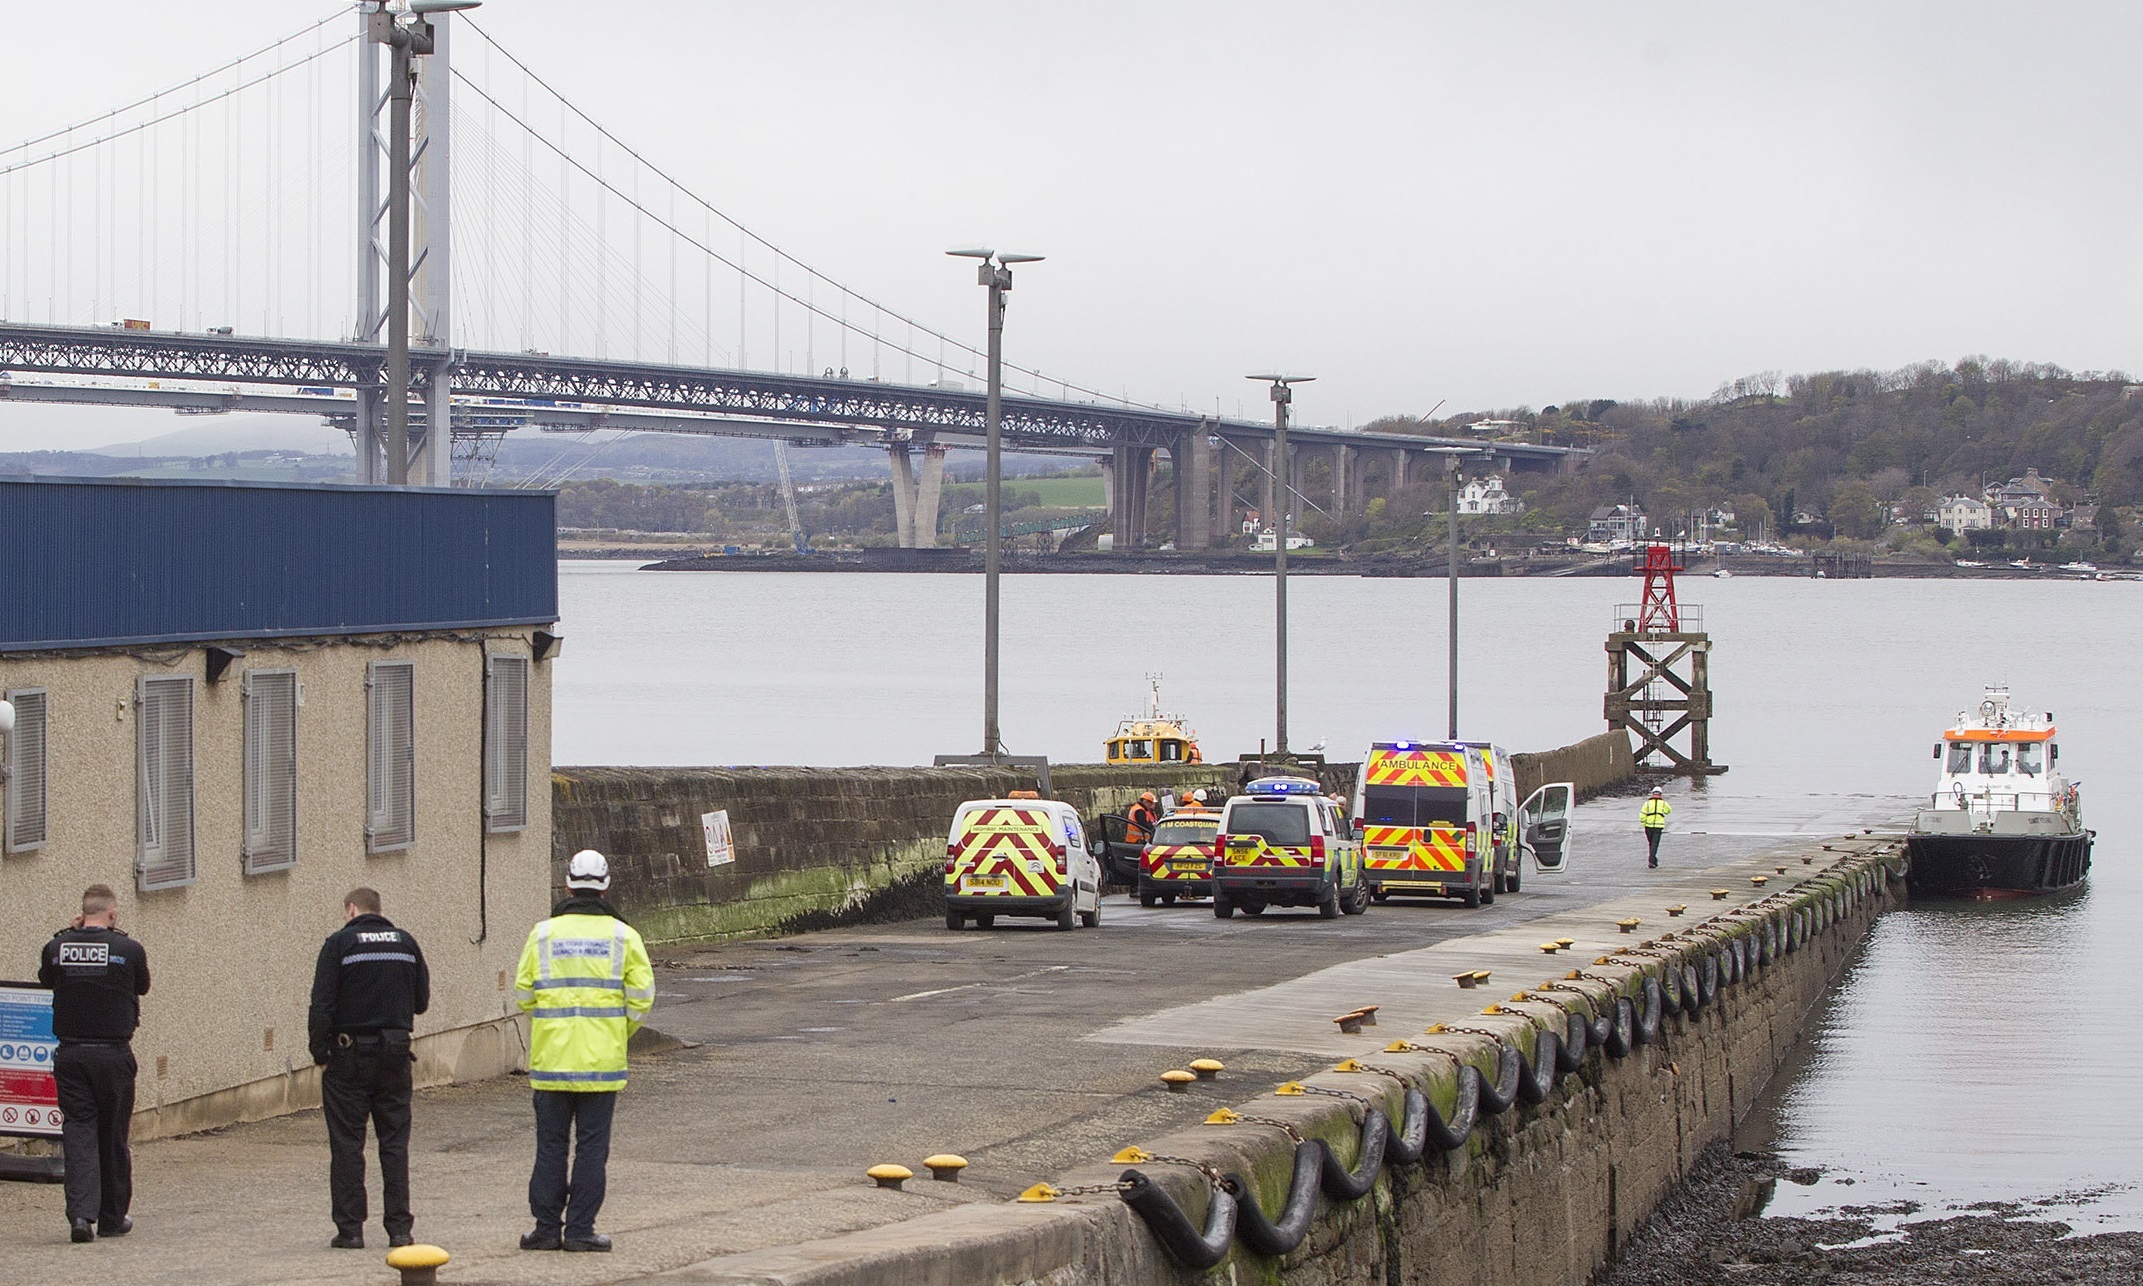 Police at the scene in South Queensferry.